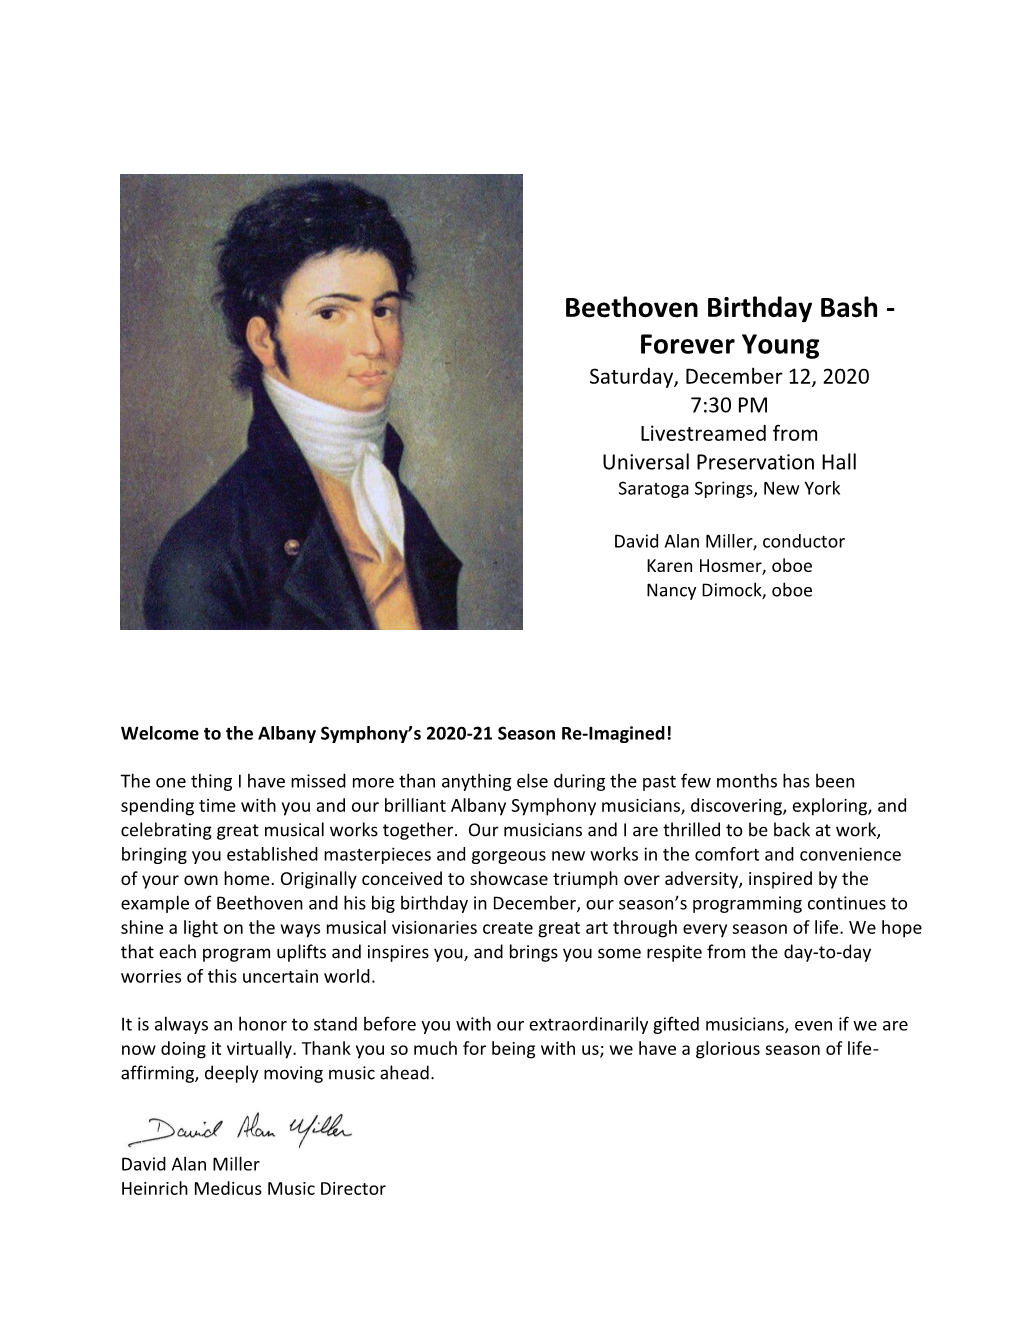 Beethoven Birthday Bash - Forever Young Saturday, December 12, 2020 7:30 PM Livestreamed from Universal Preservation Hall Saratoga Springs, New York